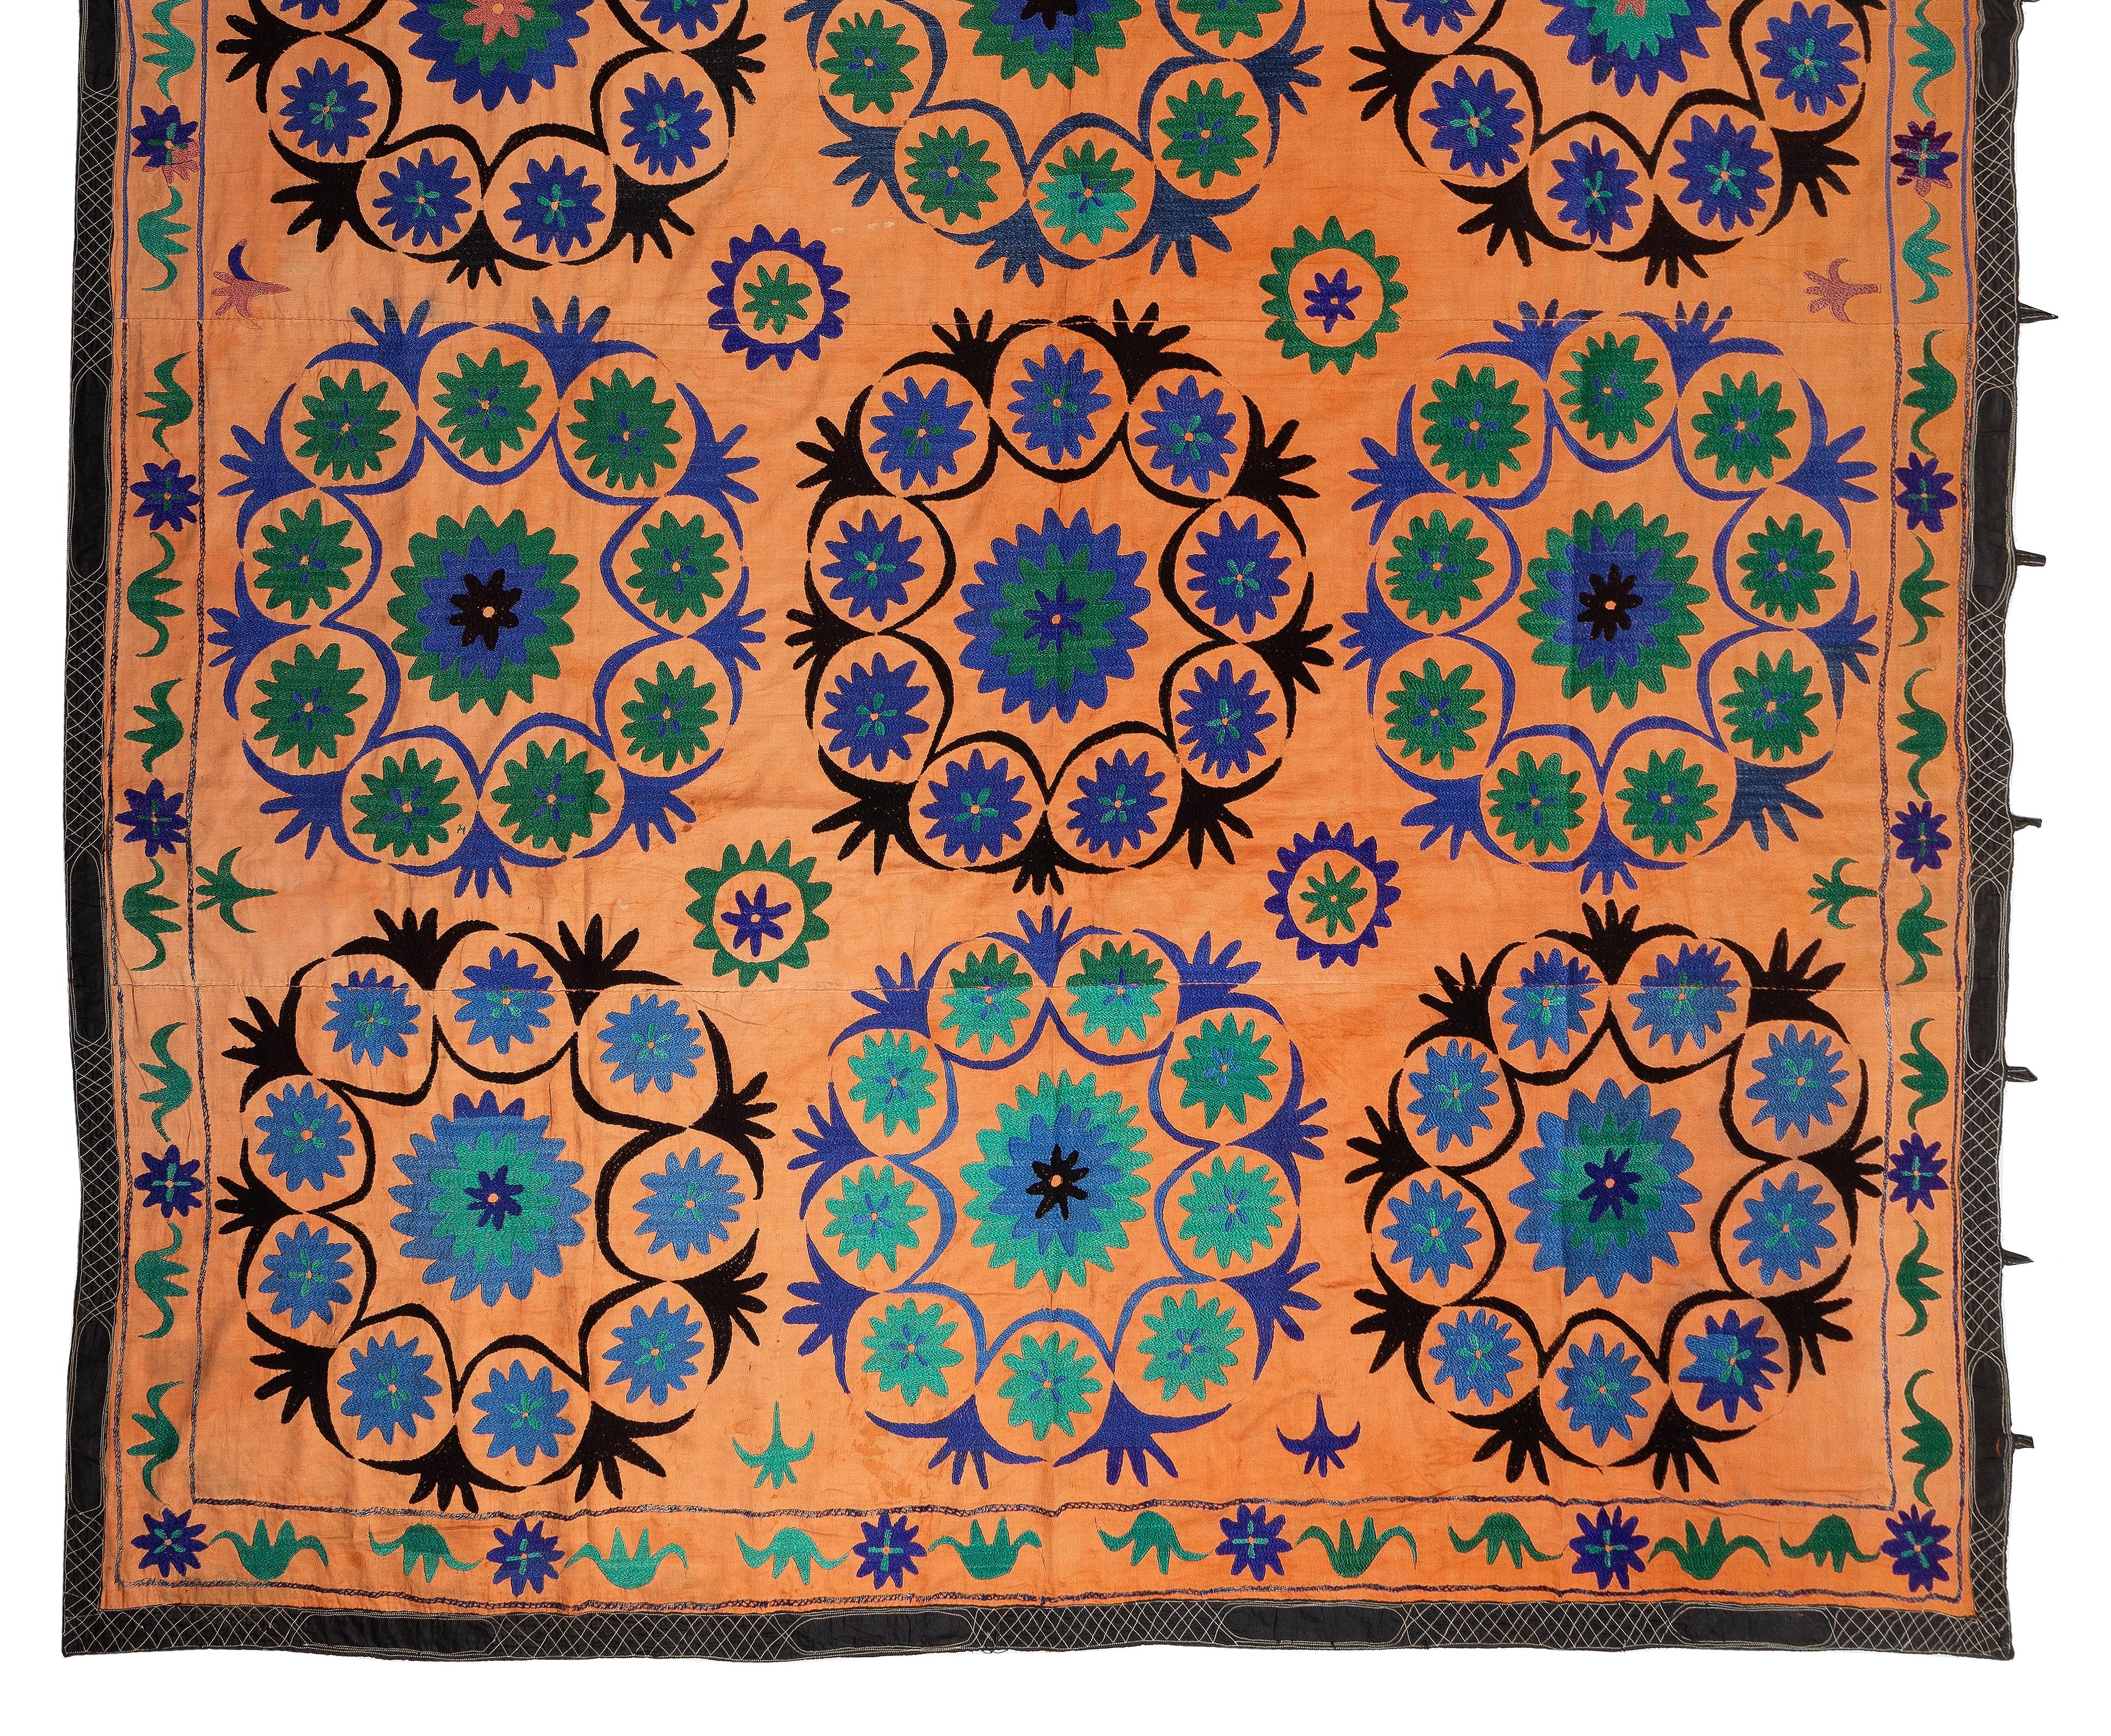 7.4x12 Ft Vintage Uzbek Floral Silk Embroidered Suzani Large Bed Cover in Orange In Good Condition For Sale In Philadelphia, PA